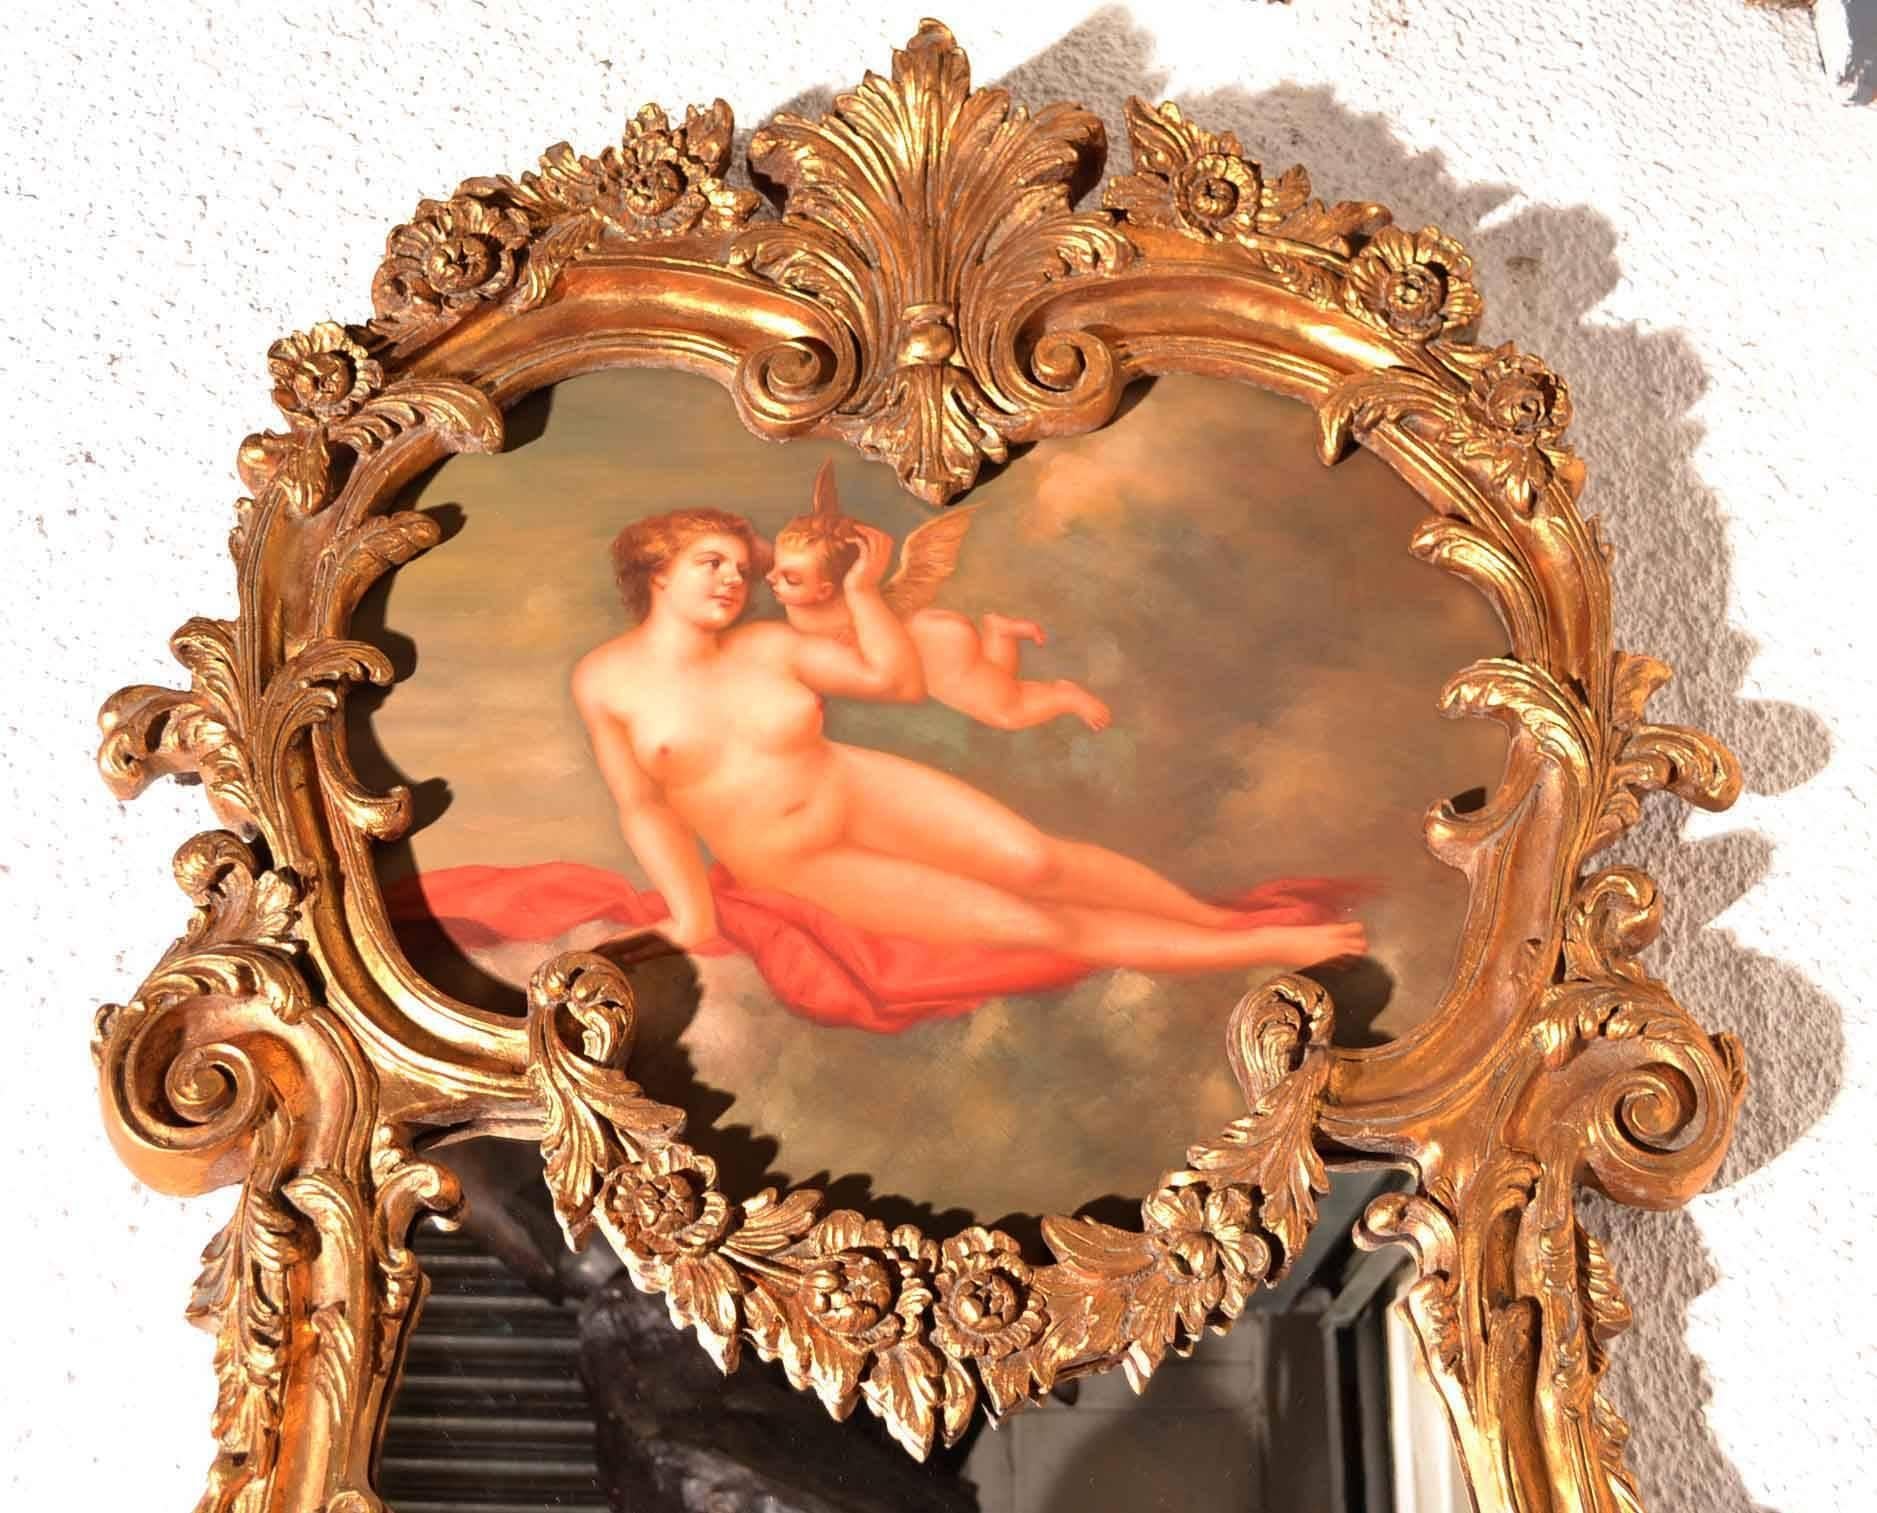 This is a beautiful and highly decorative Italian gilt mirror with a stunning hand-painted plaque depicting a Greek goddesses as a lovely cherub, dating from the last quarter of the 20th century.

The quality and craftsmanship of this stunning